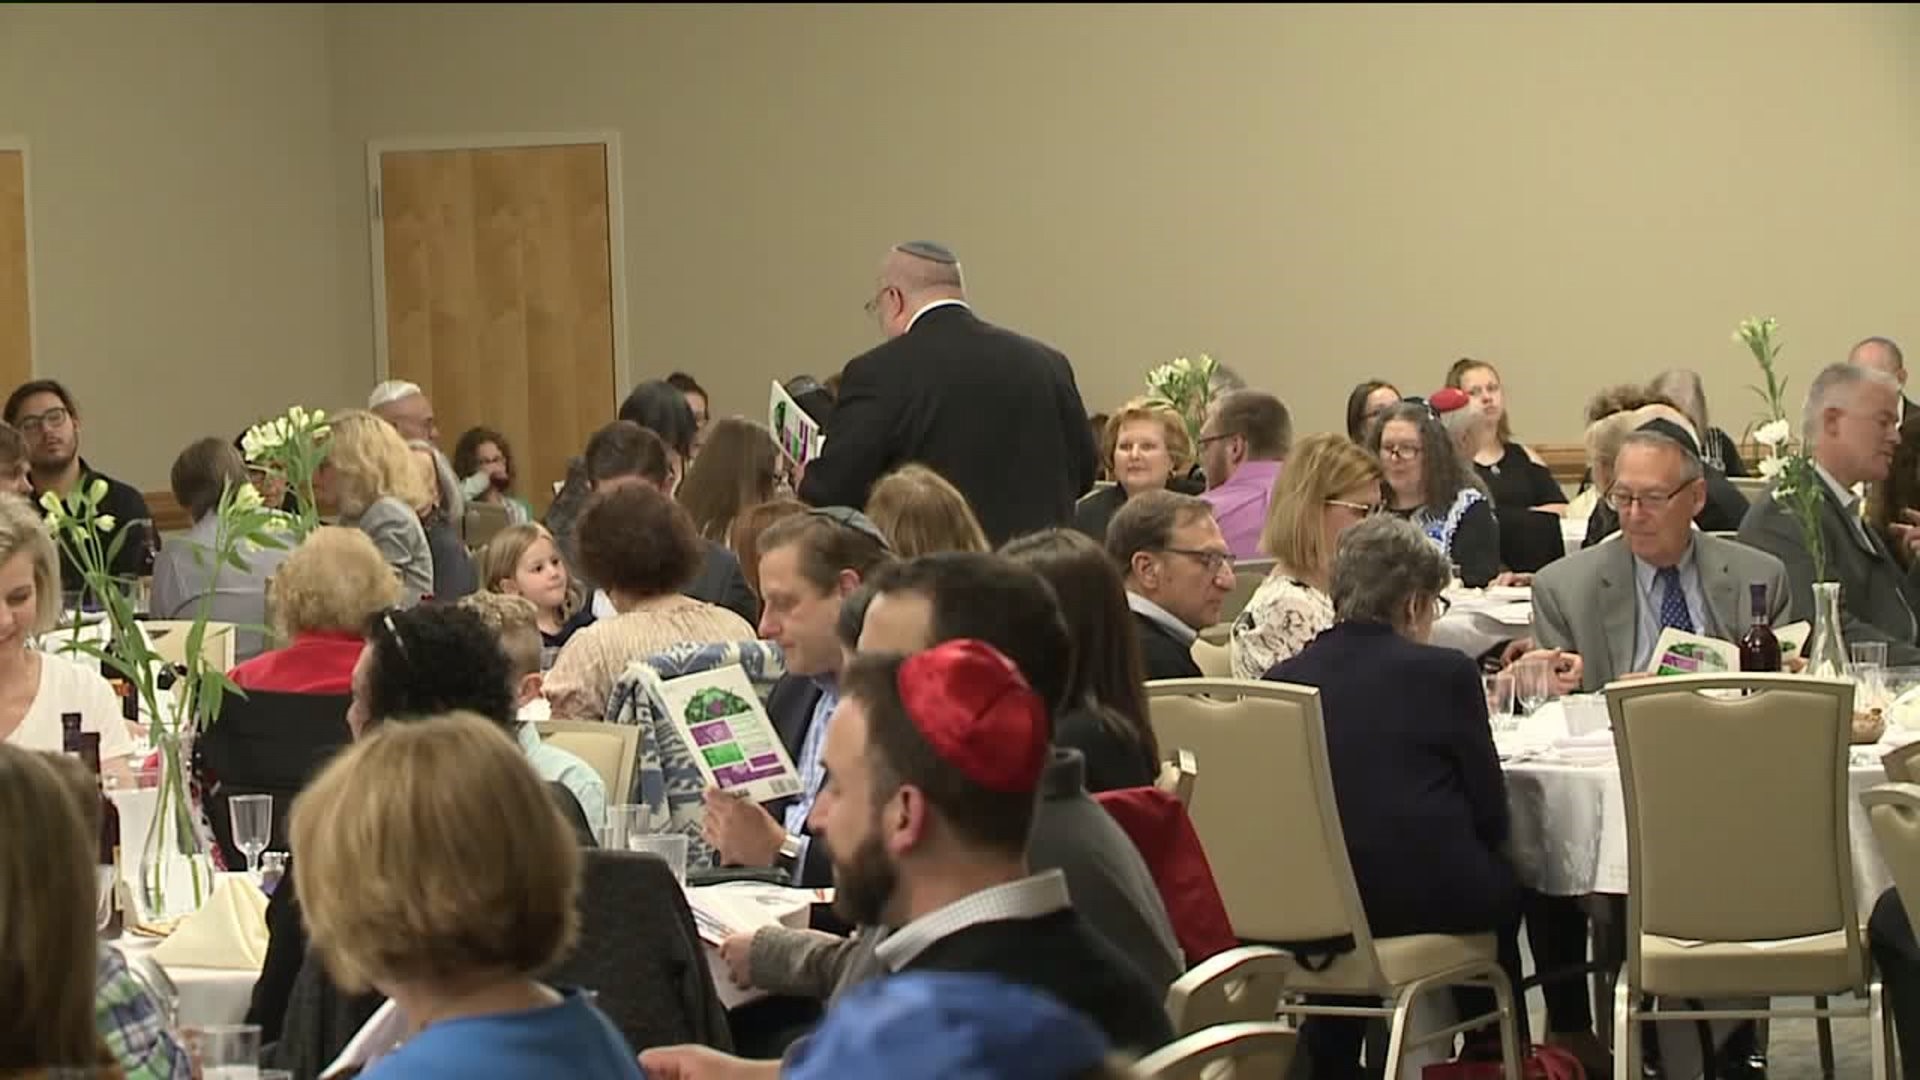 Hundreds Partake in Annual Jewish Tradition for Passover